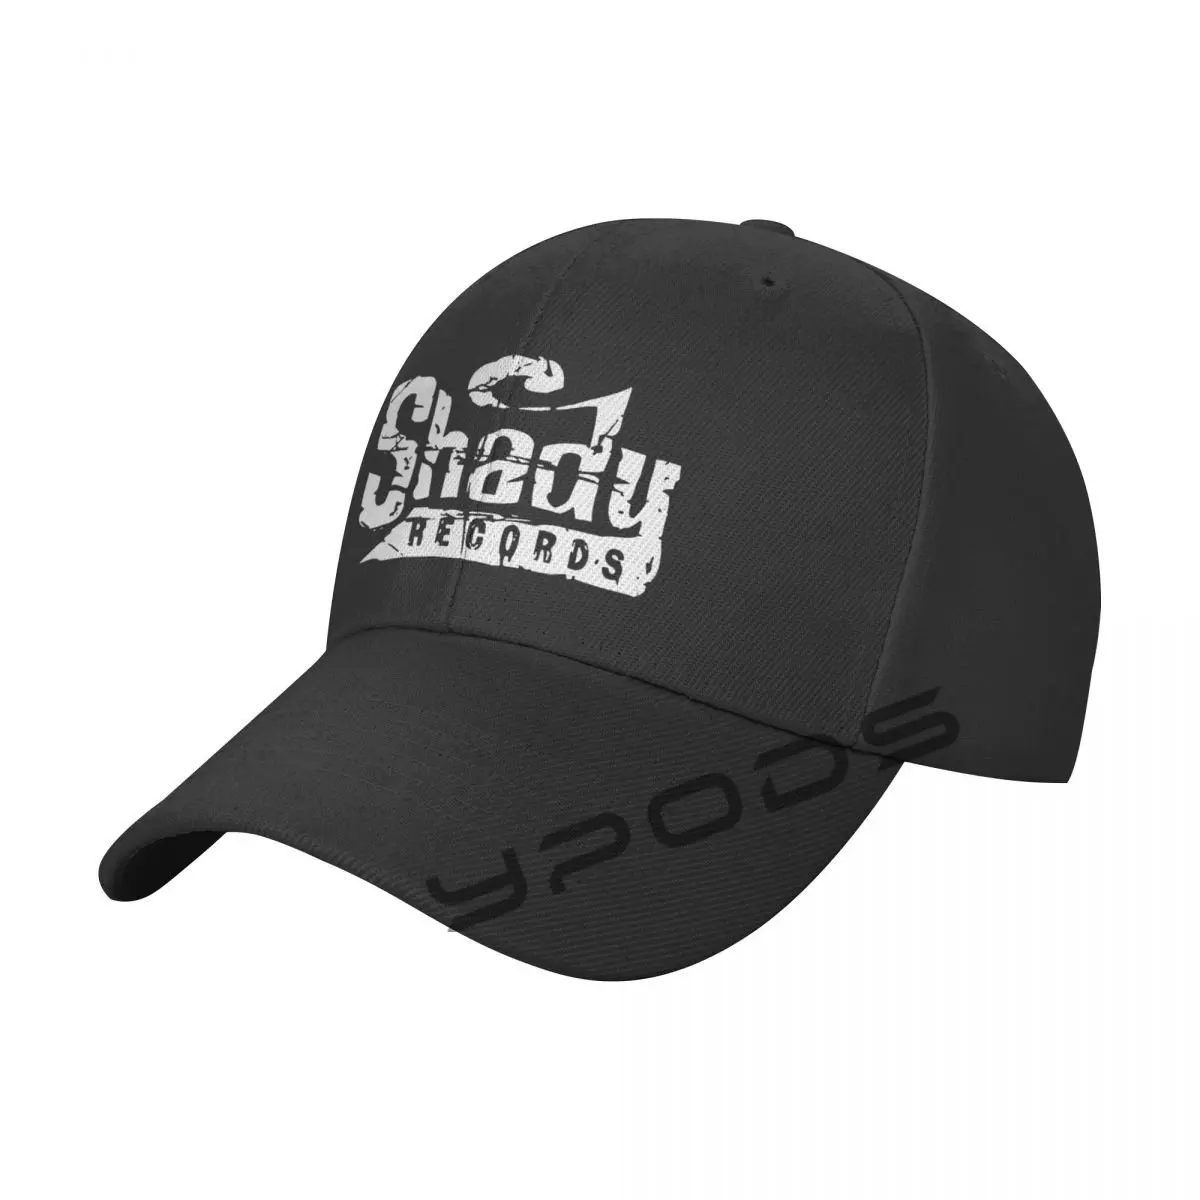 

Shady Records Casual Baseball Cap for Women and Men Fashion Hat Hard Top Caps Snapback Hat Unisex